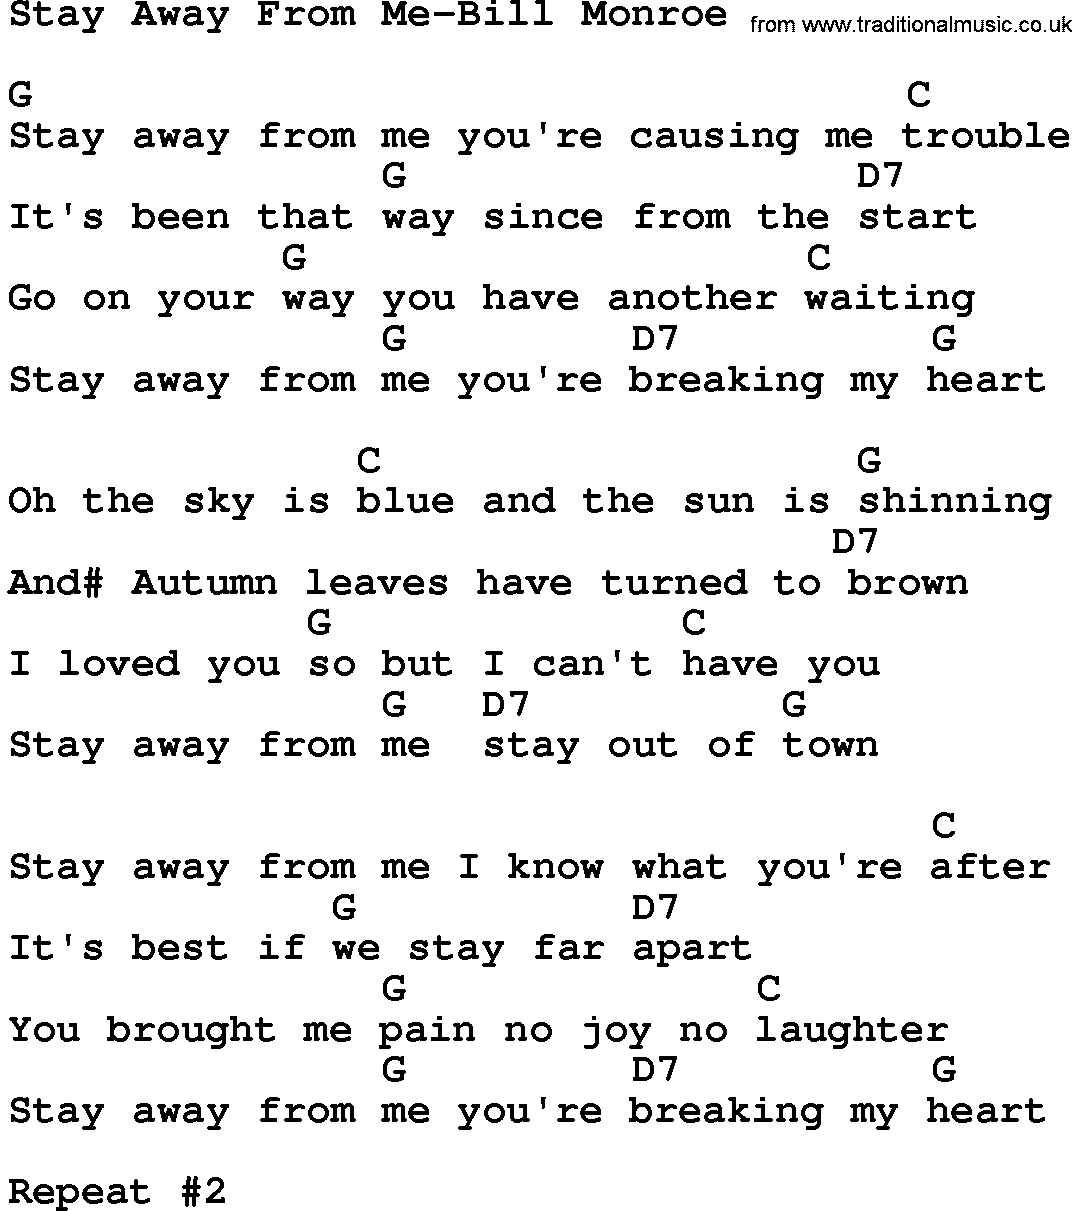 Country music song: Stay Away From Me-Bill Monroe lyrics and chords